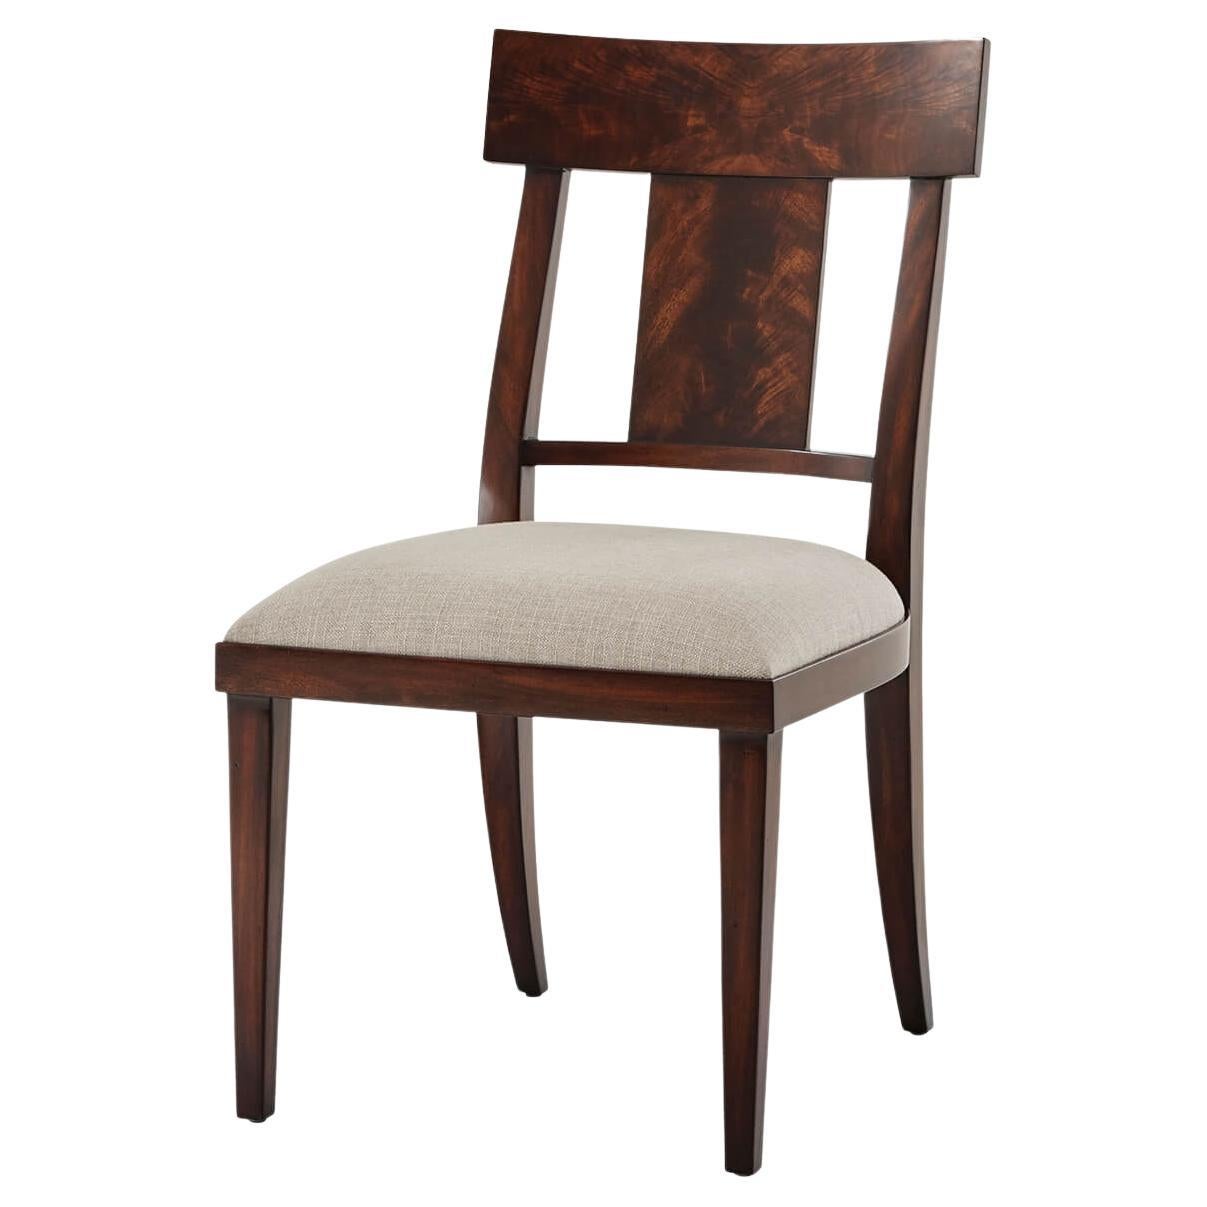 Neo Classic Mahogany Dining Chair For Sale